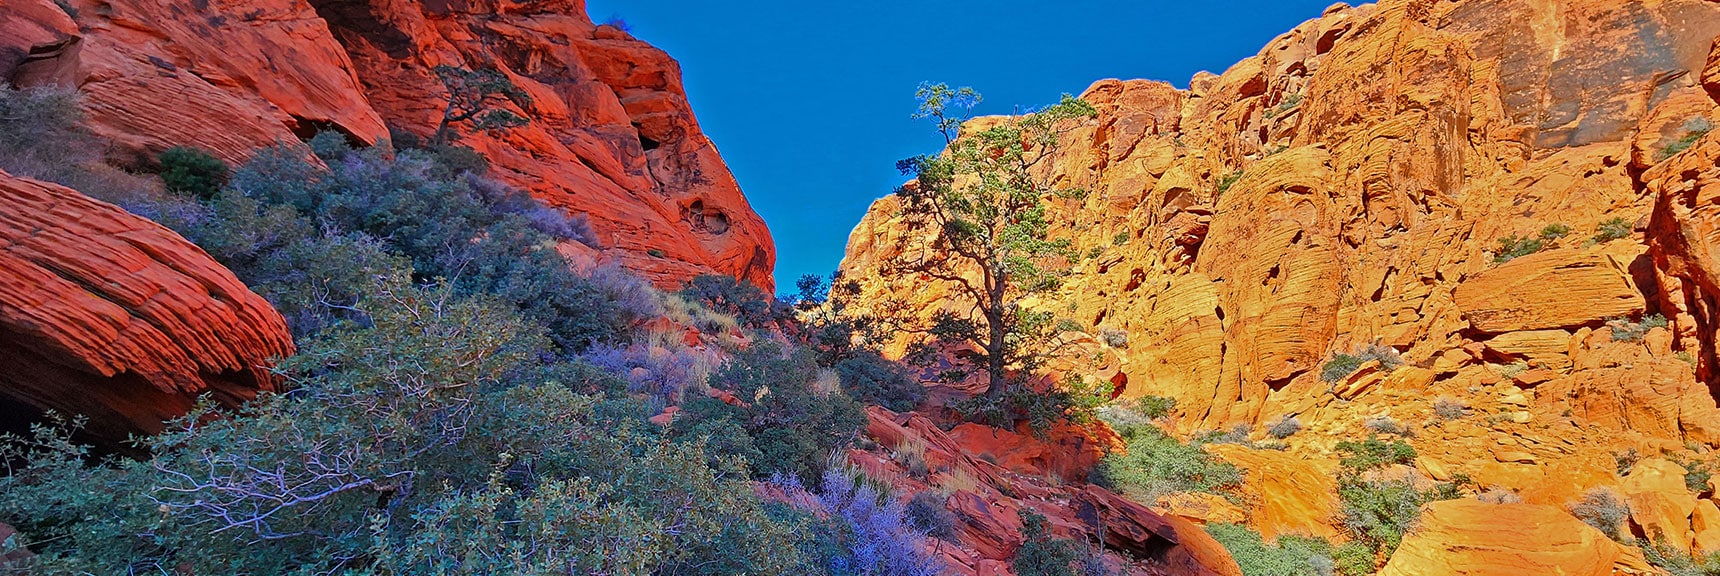 Countless Shades of Browns and Reds with Scattered Bonsai-Like Pines | Lower Calico Hills Loop | Calico Basin & Red Rock Canyon, Nevada